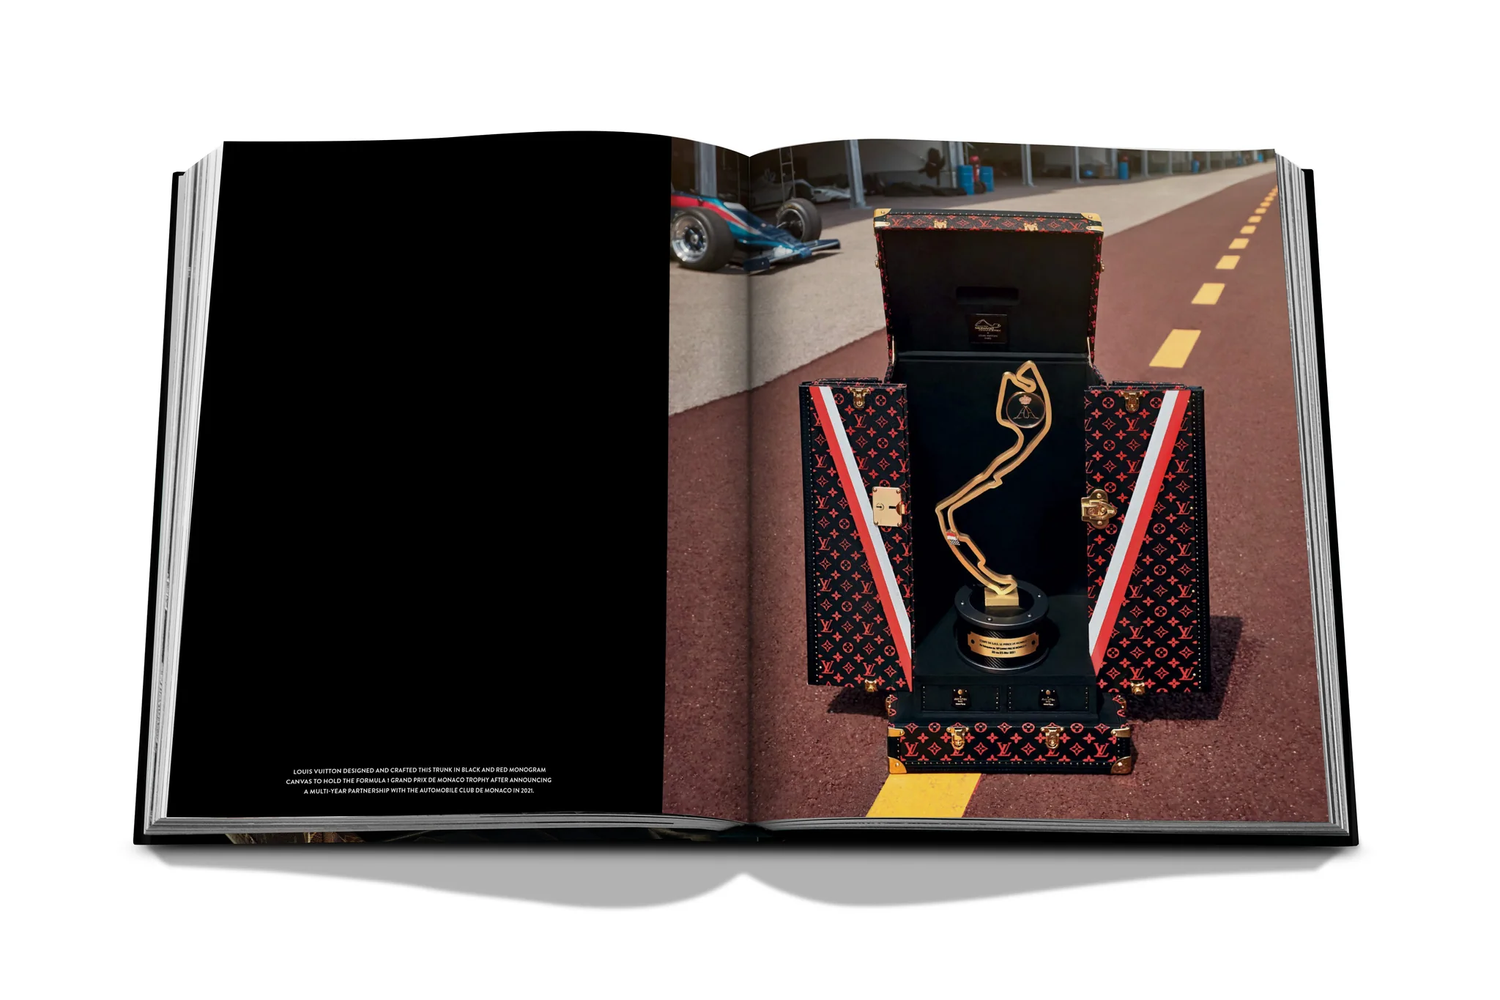 This year, the Monaco Grand Prix trophy will come in a bespoke Louis  Vuitton suitcase - GQ Australia